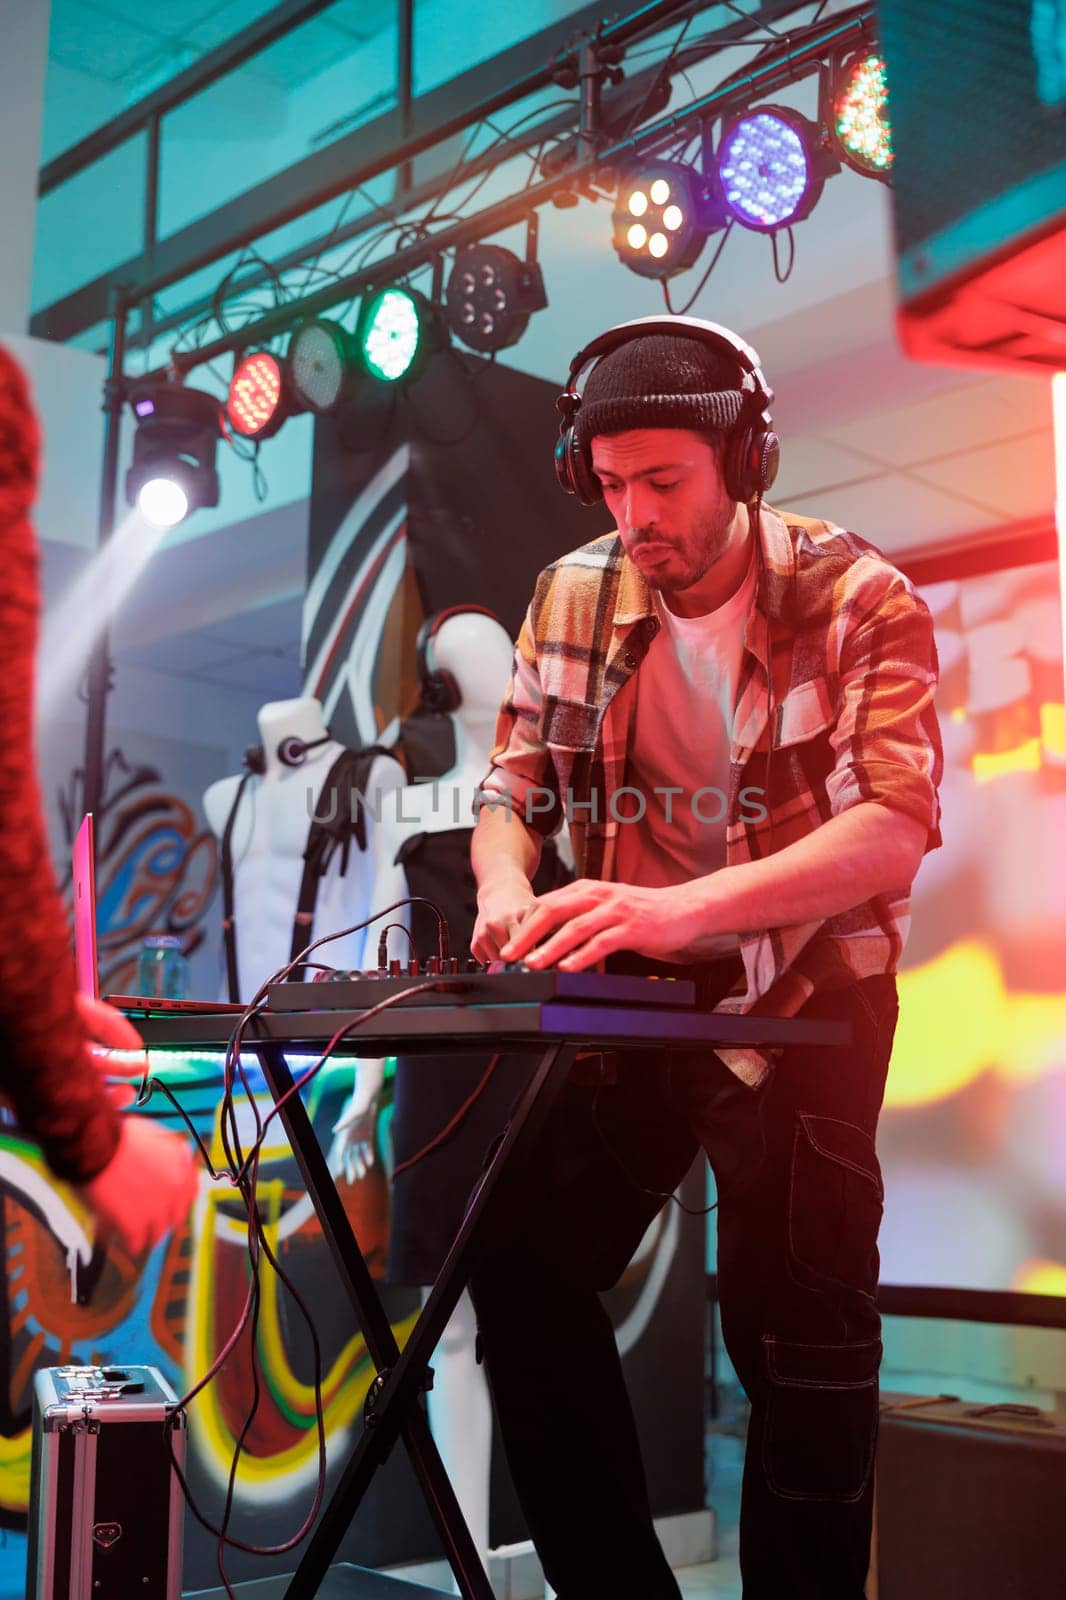 Performer playing techno music in club by DCStudio